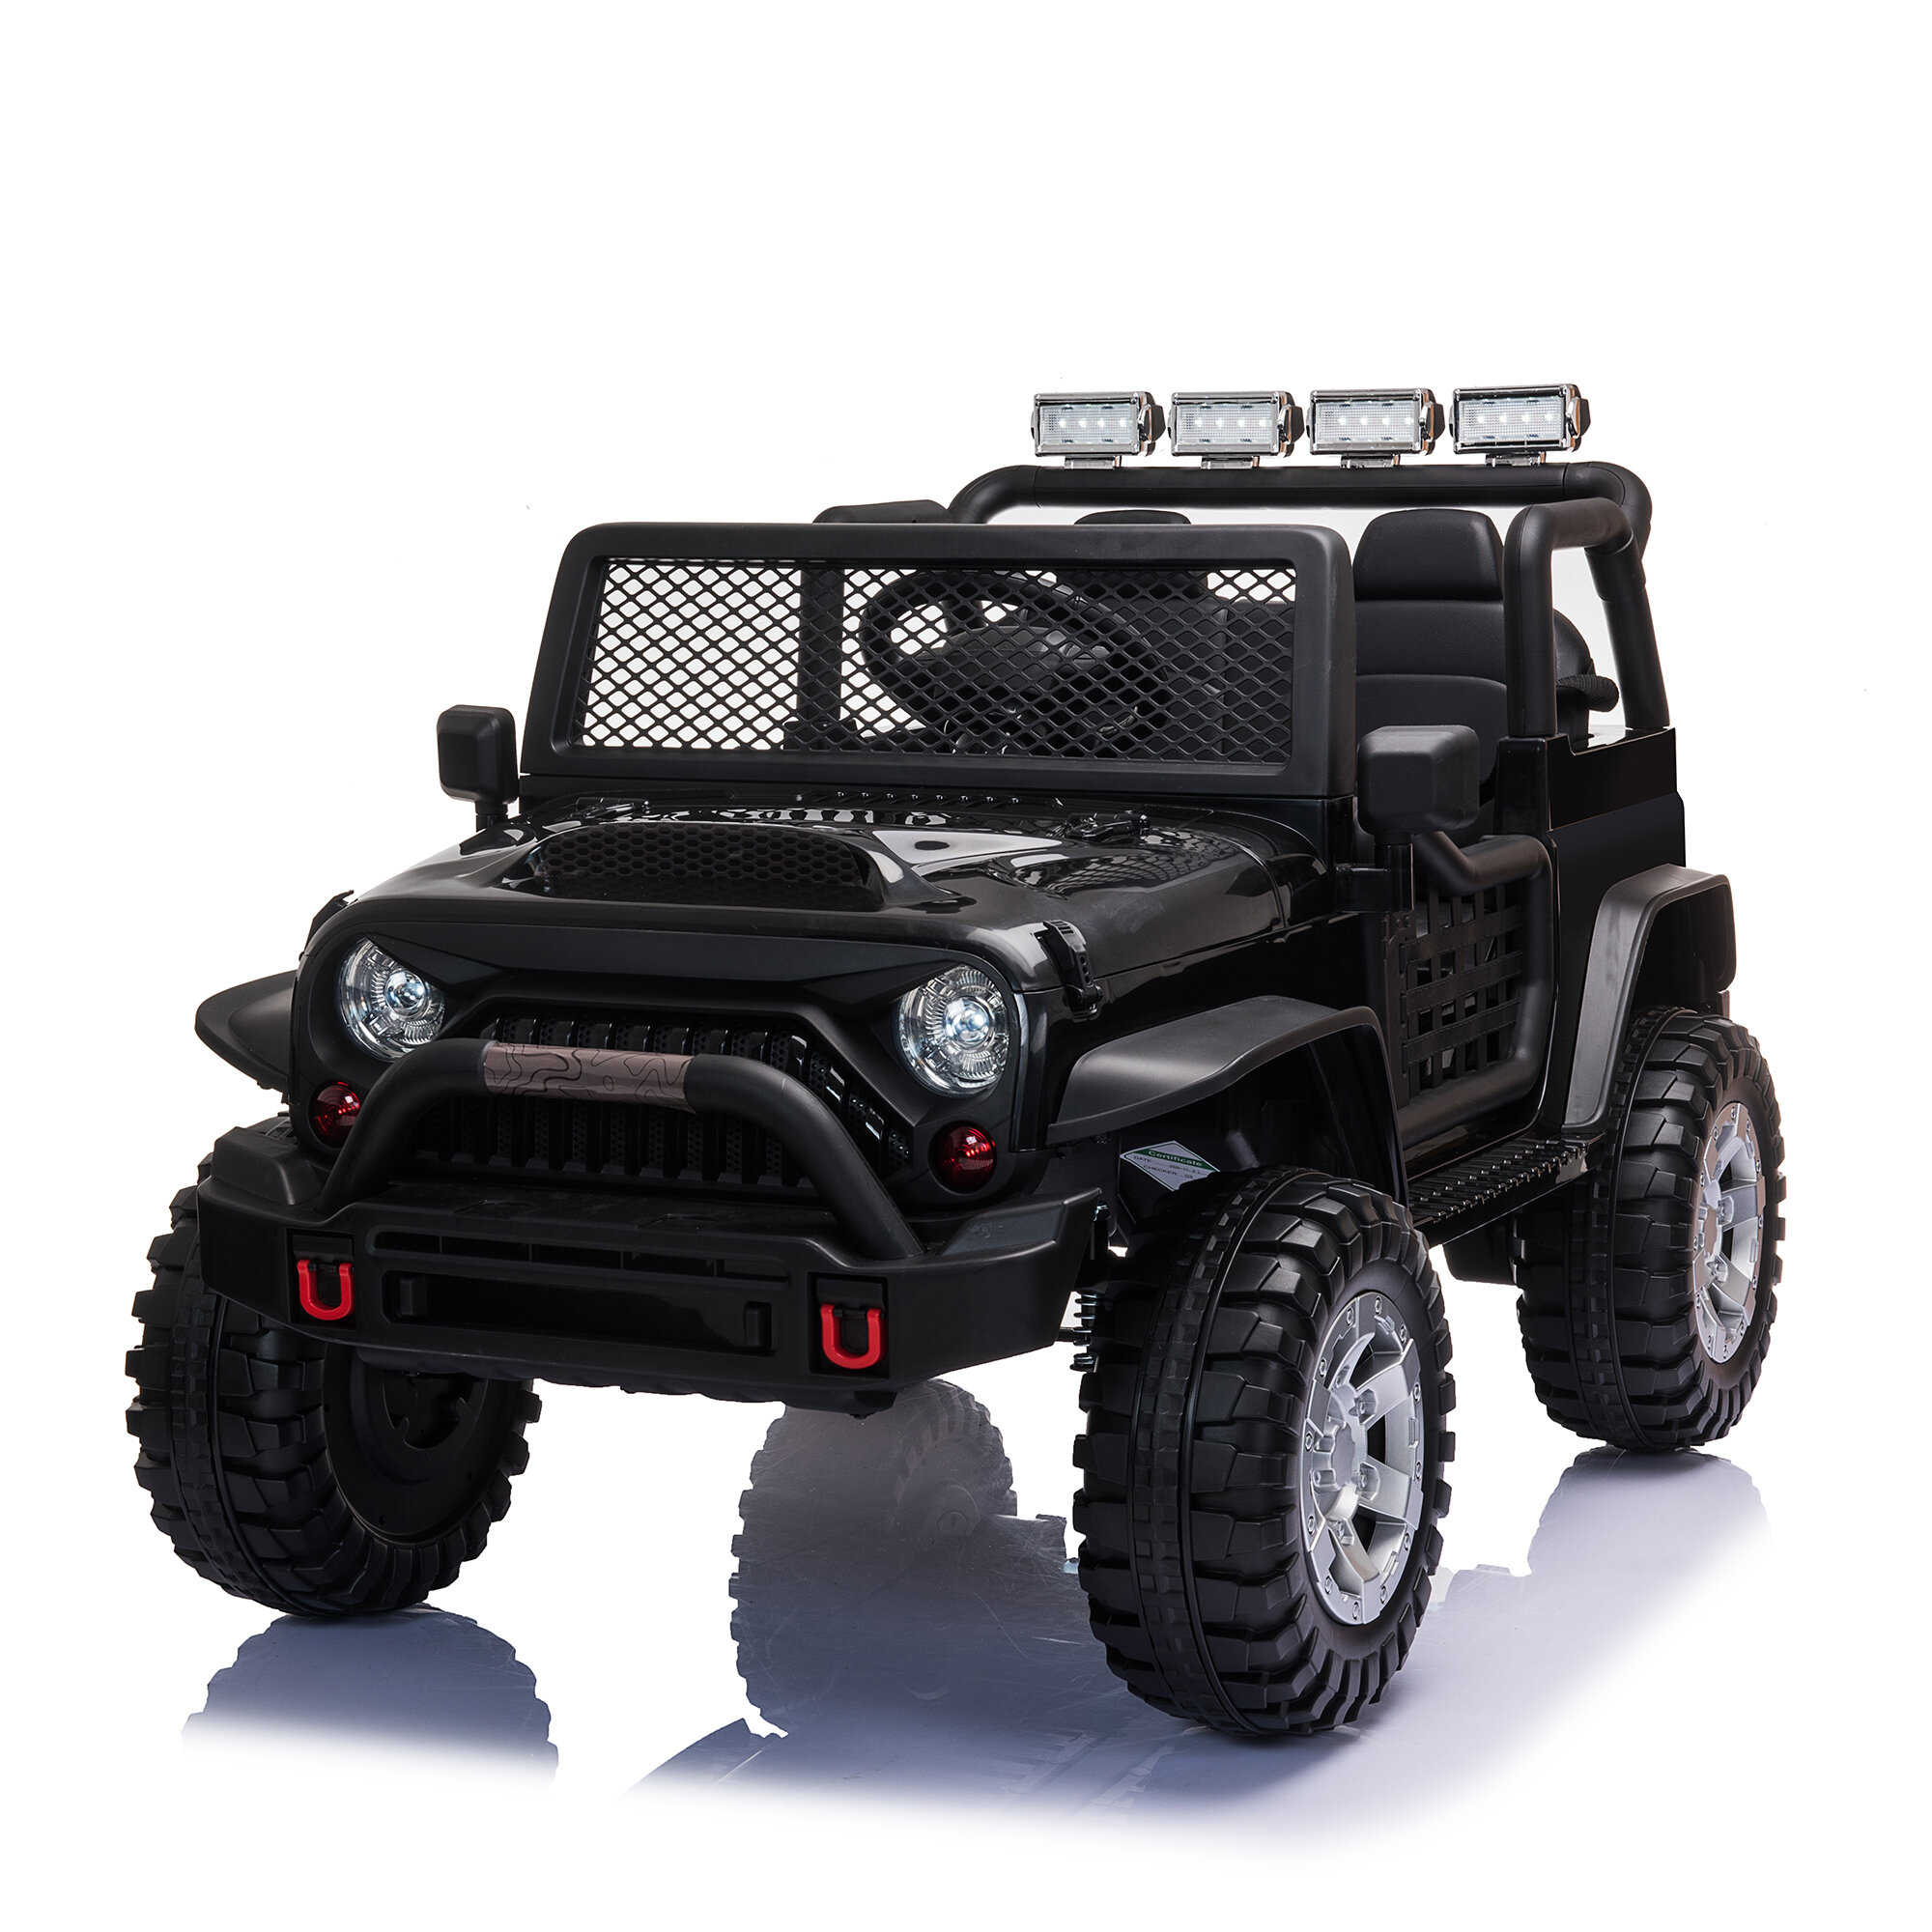 12V 3Speed Kid Ride On Electric Remote Control Car Jeep outdoor/Indoor Toy Black